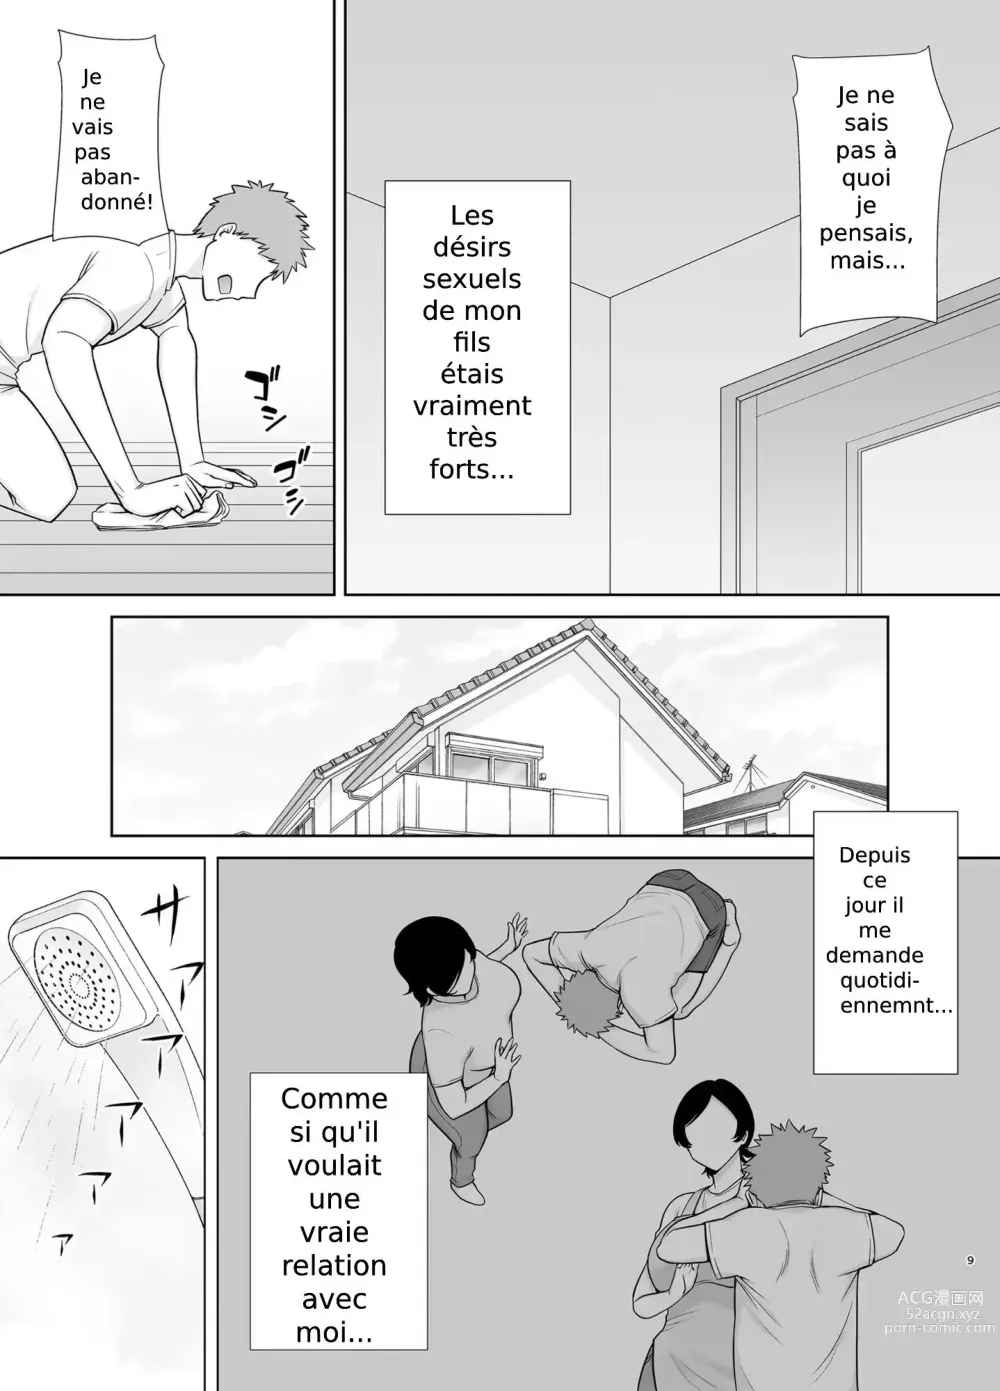 Page 9 of doujinshi Mothers Are Women Too!